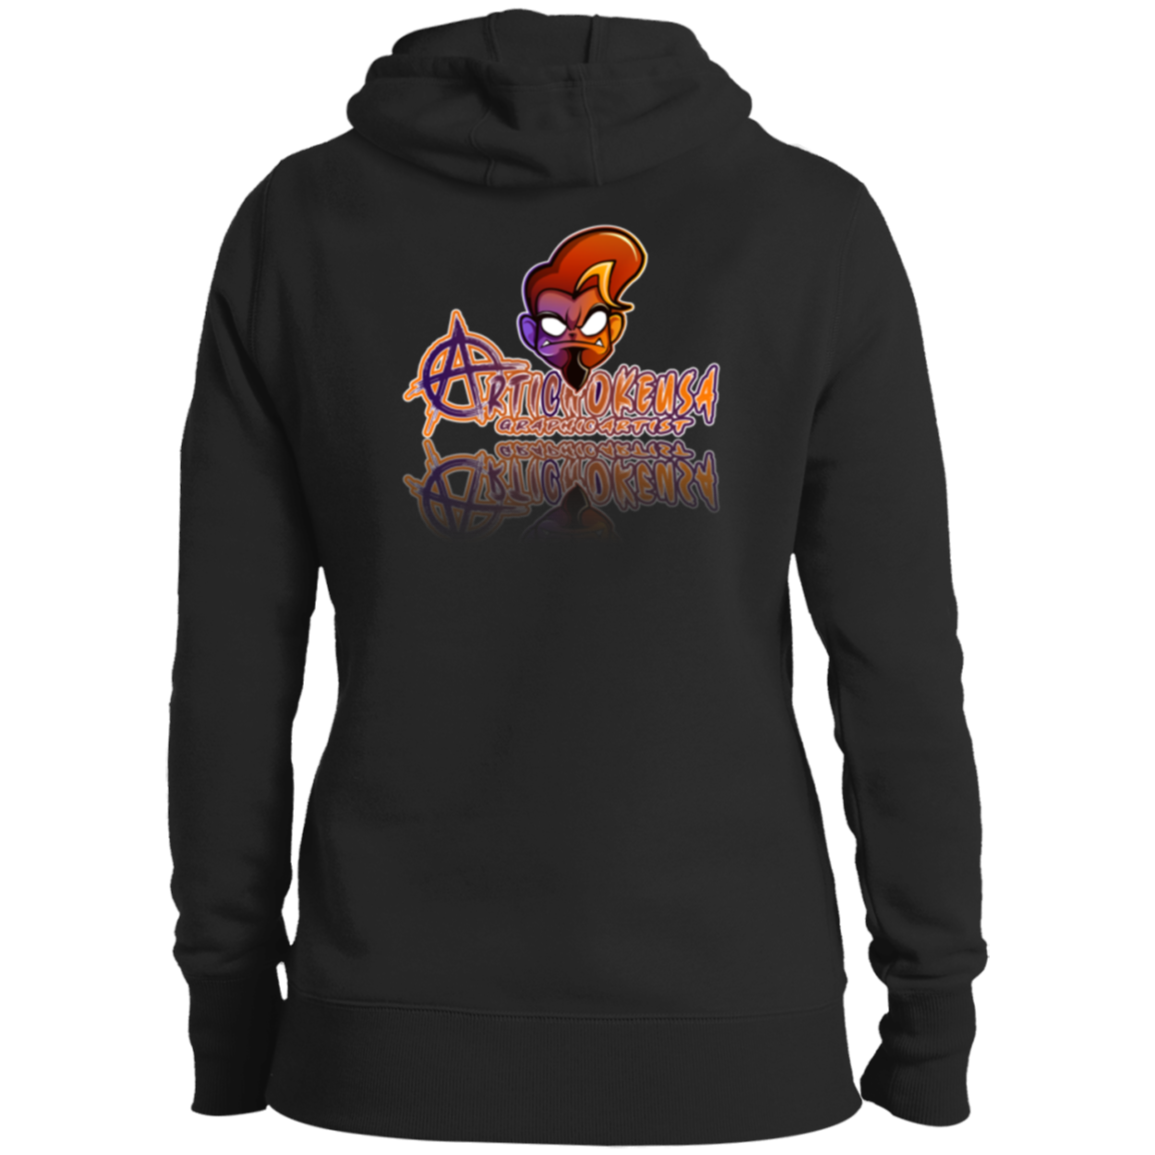 ArtichokeUSA Character and Font design.  Let's Create Your Own Team Design Today. Arthur. Ladies' Pullover Hooded Sweatshirt